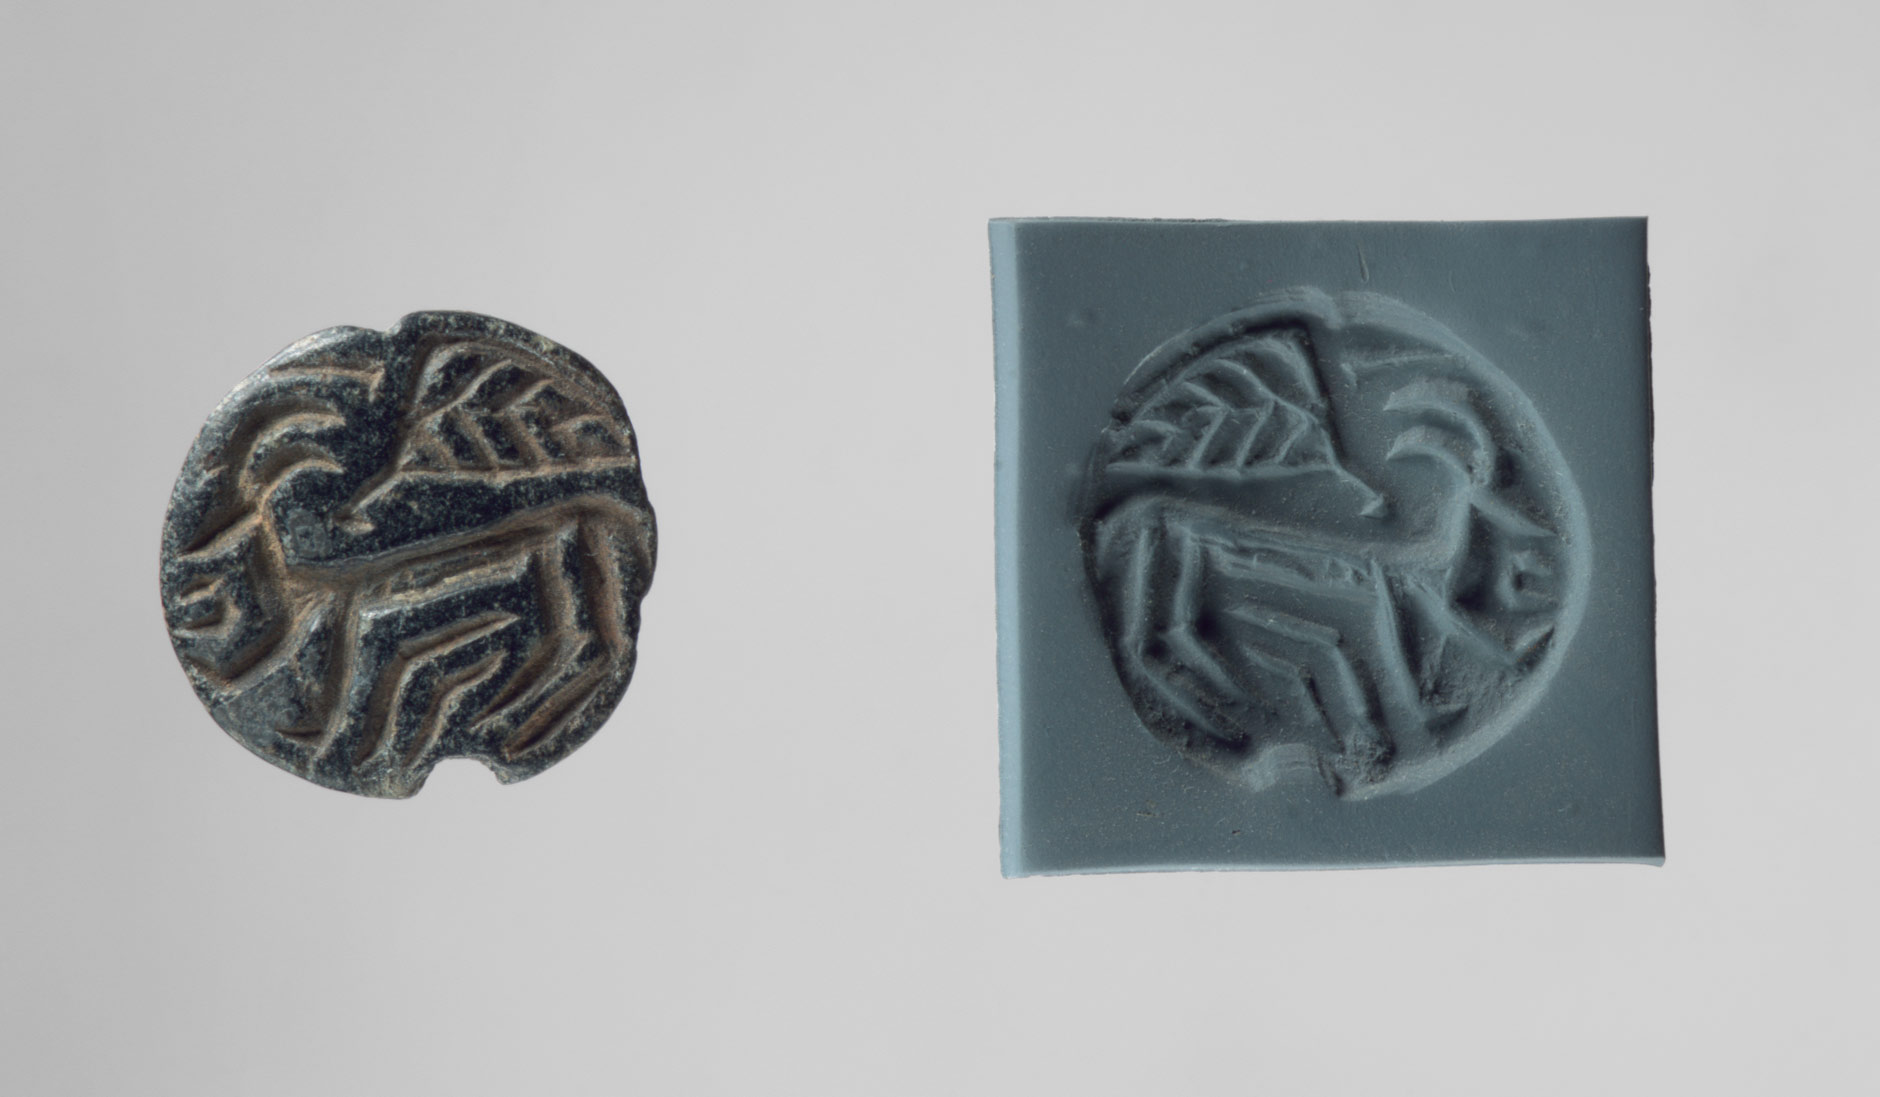 Stamp seal and modern impression: horned animal and bird